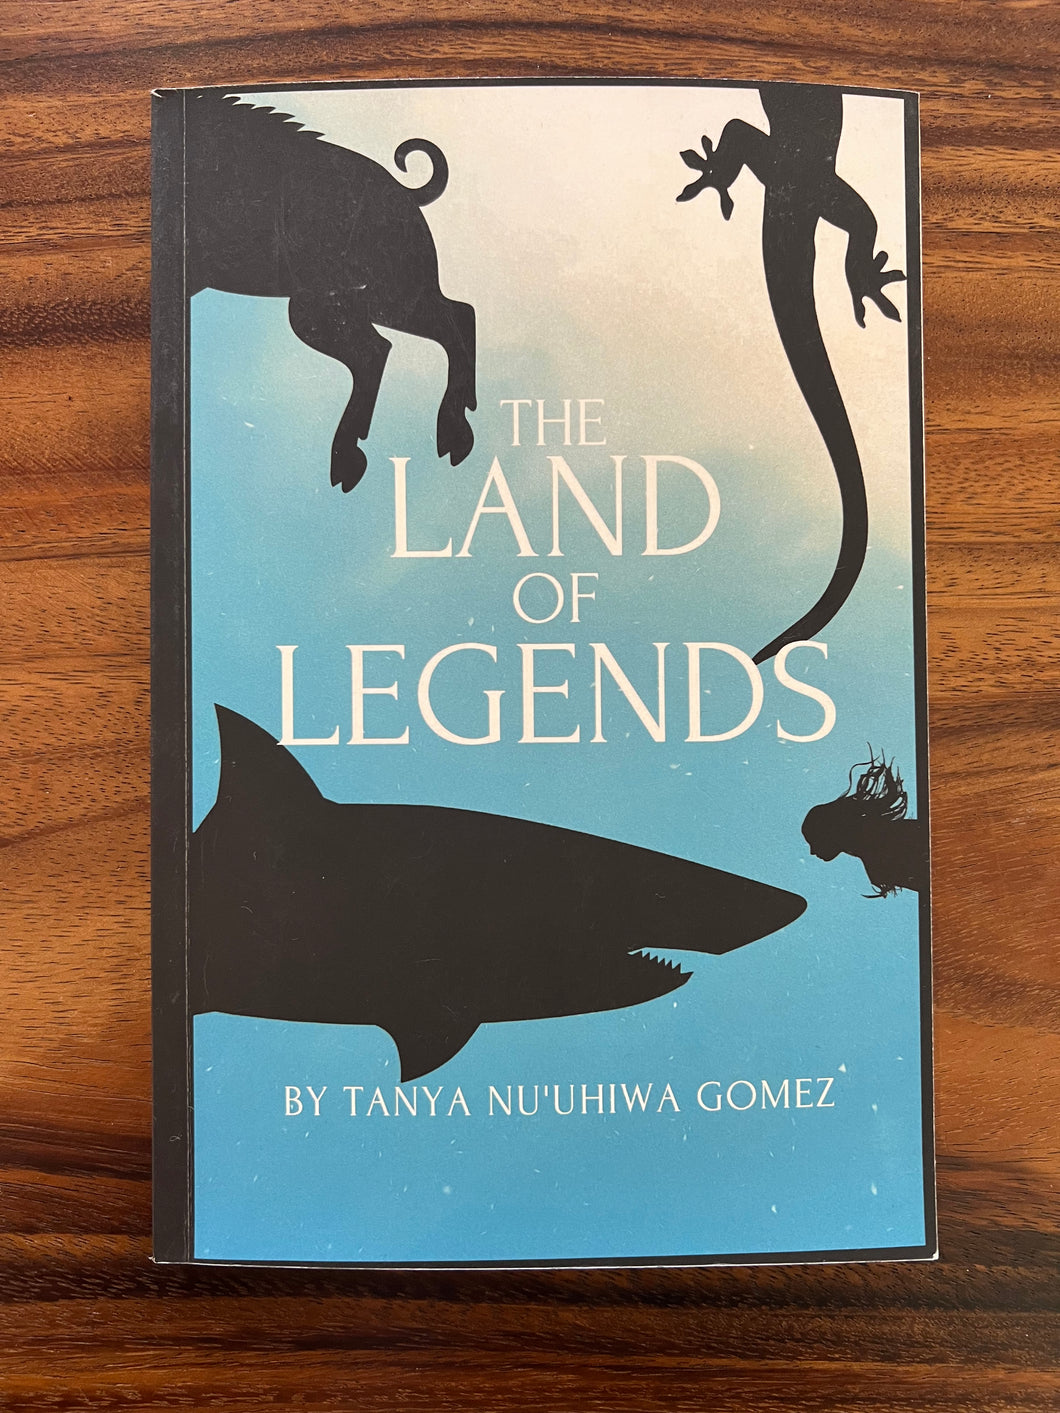 The Land of Legends Book by Tanya Nu’uhiwa Gomez